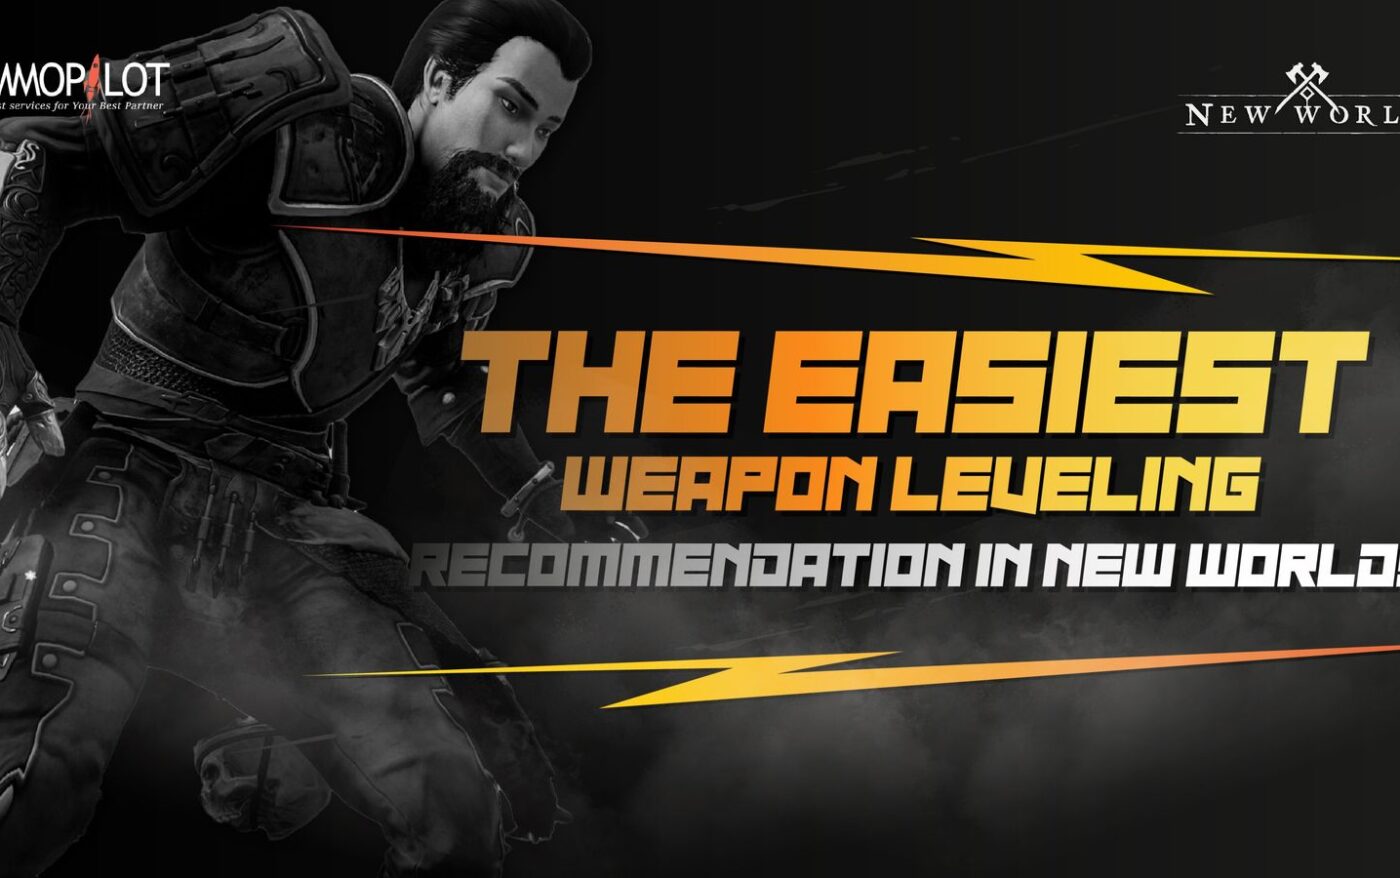 The Easiest Weapon Leveling Recommendation in New World